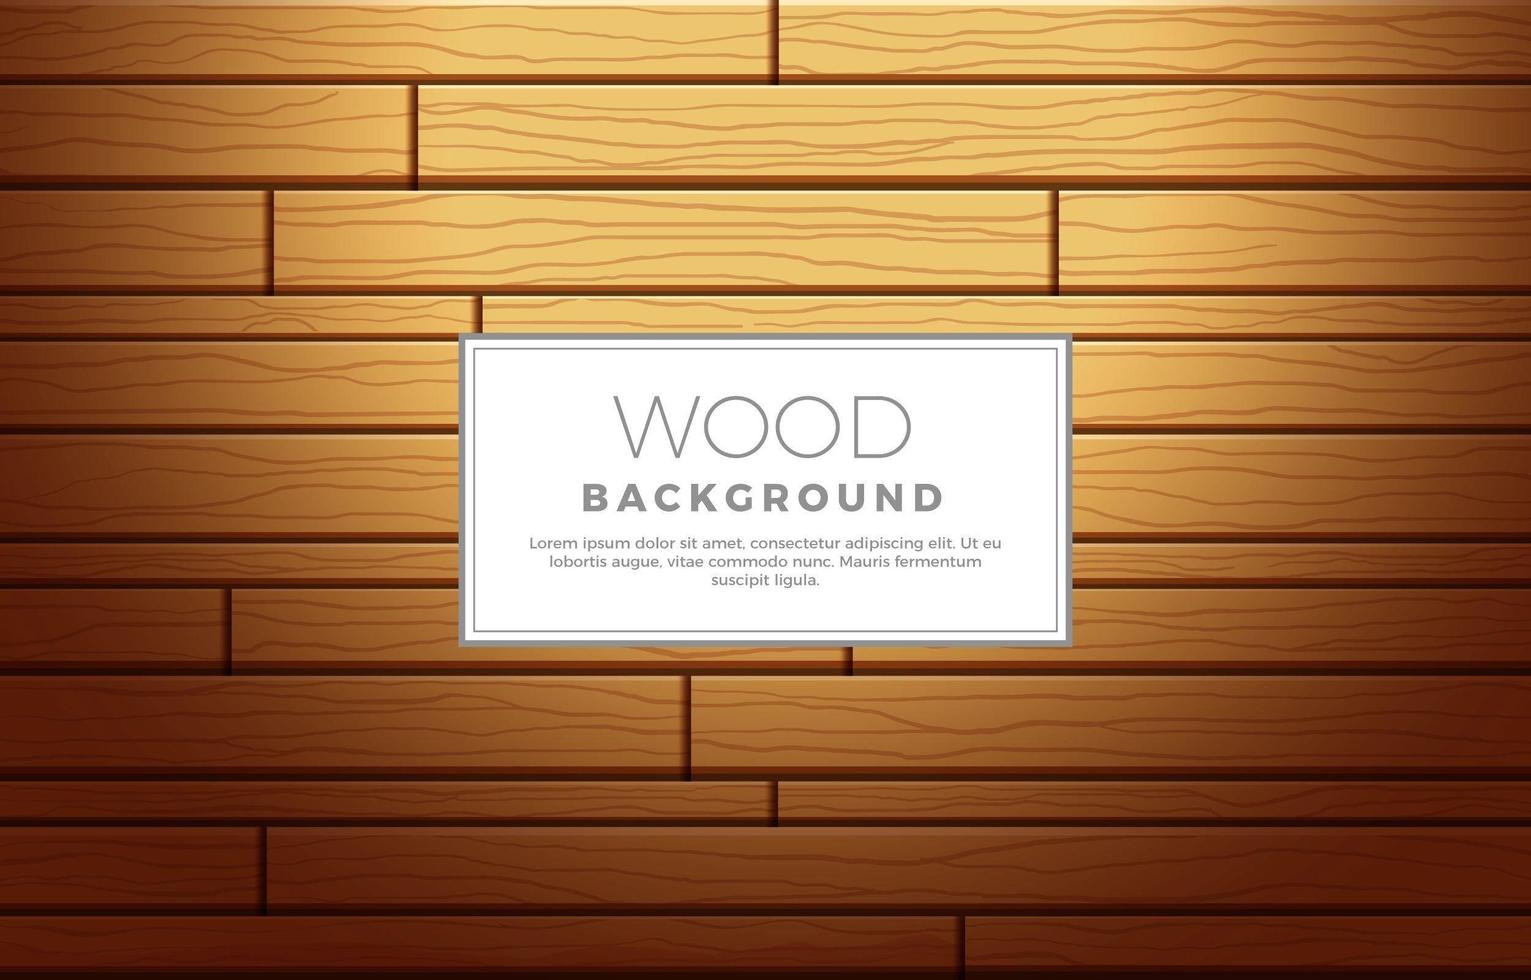 Smooth Stacks of Wood Planks Background vector